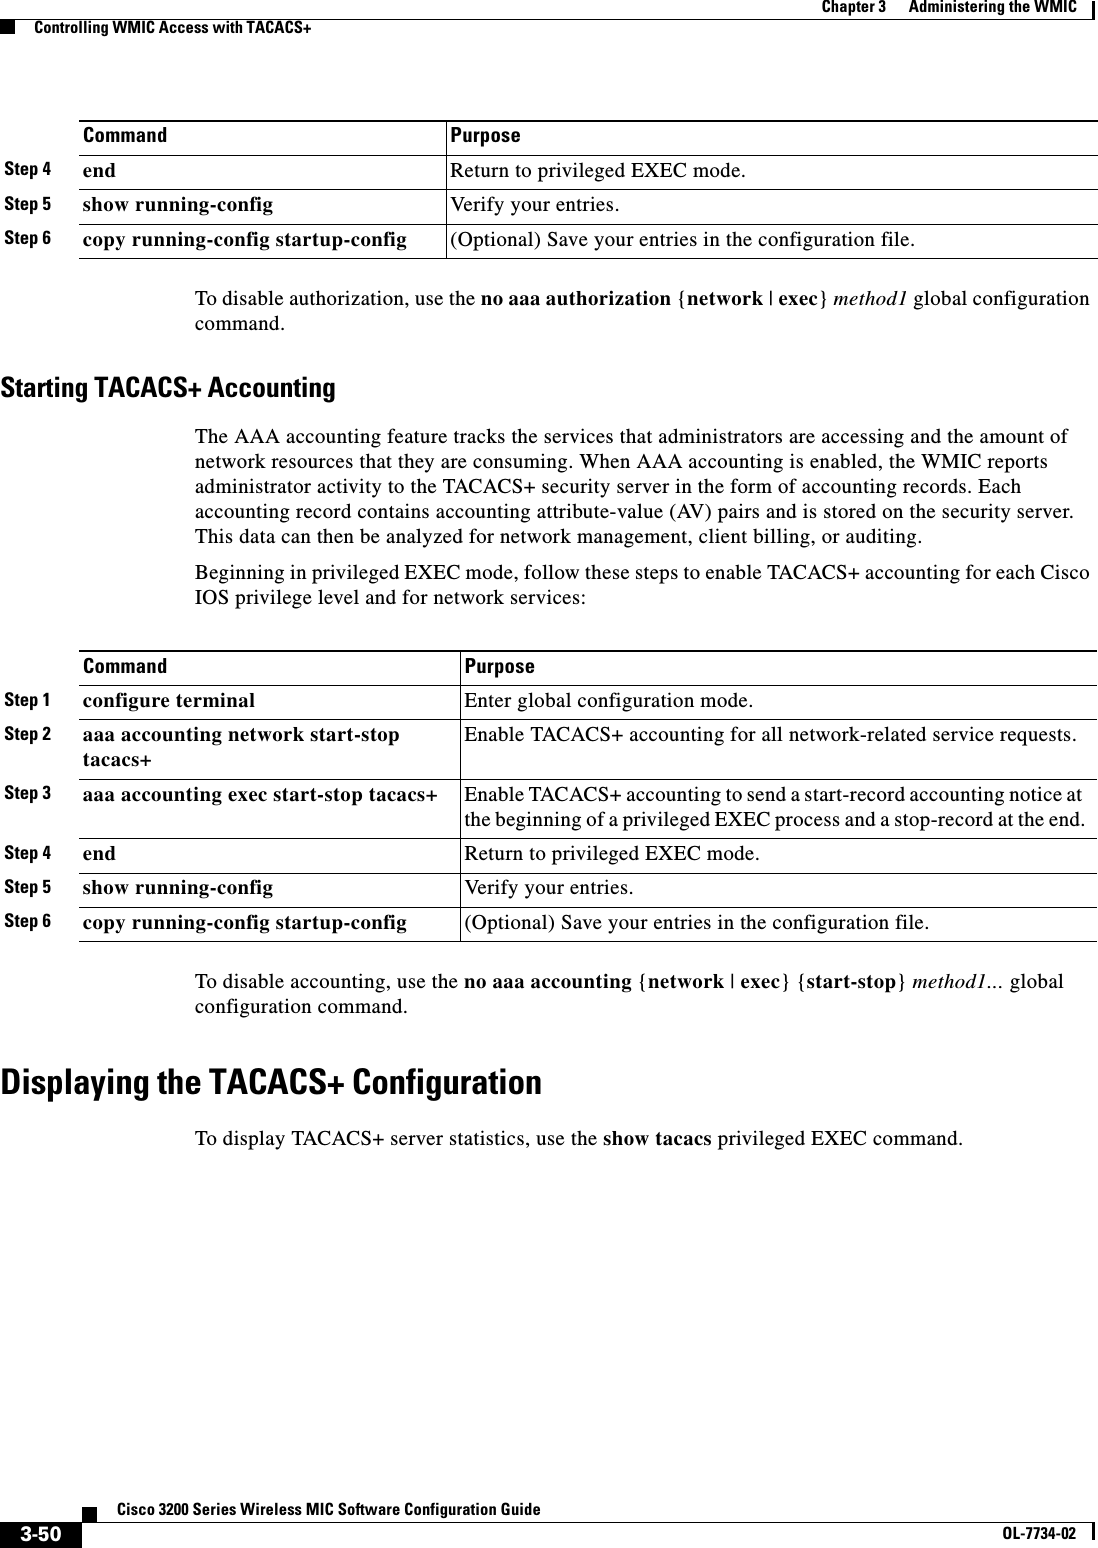 3-50Cisco 3200 Series Wireless MIC Software Configuration GuideOL-7734-02Chapter 3      Administering the WMICControlling WMIC Access with TACACS+To disable authorization, use the no aaa authorization {network | exec}method1 global configuration command. Starting TACACS+ AccountingThe AAA accounting feature tracks the services that administrators are accessing and the amount of network resources that they are consuming. When AAA accounting is enabled, the WMIC reports administrator activity to the TACACS+ security server in the form of accounting records. Each accounting record contains accounting attribute-value (AV) pairs and is stored on the security server. This data can then be analyzed for network management, client billing, or auditing.Beginning in privileged EXEC mode, follow these steps to enable TACACS+ accounting for each Cisco IOS privilege level and for network services:To disable accounting, use the no aaa accounting {network | exec} {start-stop}method1... global configuration command.Displaying the TACACS+ ConfigurationTo display TACACS+ server statistics, use the show tacacs privileged EXEC command.Step 4 end Return to privileged EXEC mode.Step 5 show running-config Verify your entries.Step 6 copy running-config startup-config (Optional) Save your entries in the configuration file.Command PurposeCommand PurposeStep 1 configure terminal Enter global configuration mode.Step 2 aaa accounting network start-stop tacacs+Enable TACACS+ accounting for all network-related service requests. Step 3 aaa accounting exec start-stop tacacs+ Enable TACACS+ accounting to send a start-record accounting notice at the beginning of a privileged EXEC process and a stop-record at the end.Step 4 end Return to privileged EXEC mode.Step 5 show running-config Verify your entries.Step 6 copy running-config startup-config (Optional) Save your entries in the configuration file.